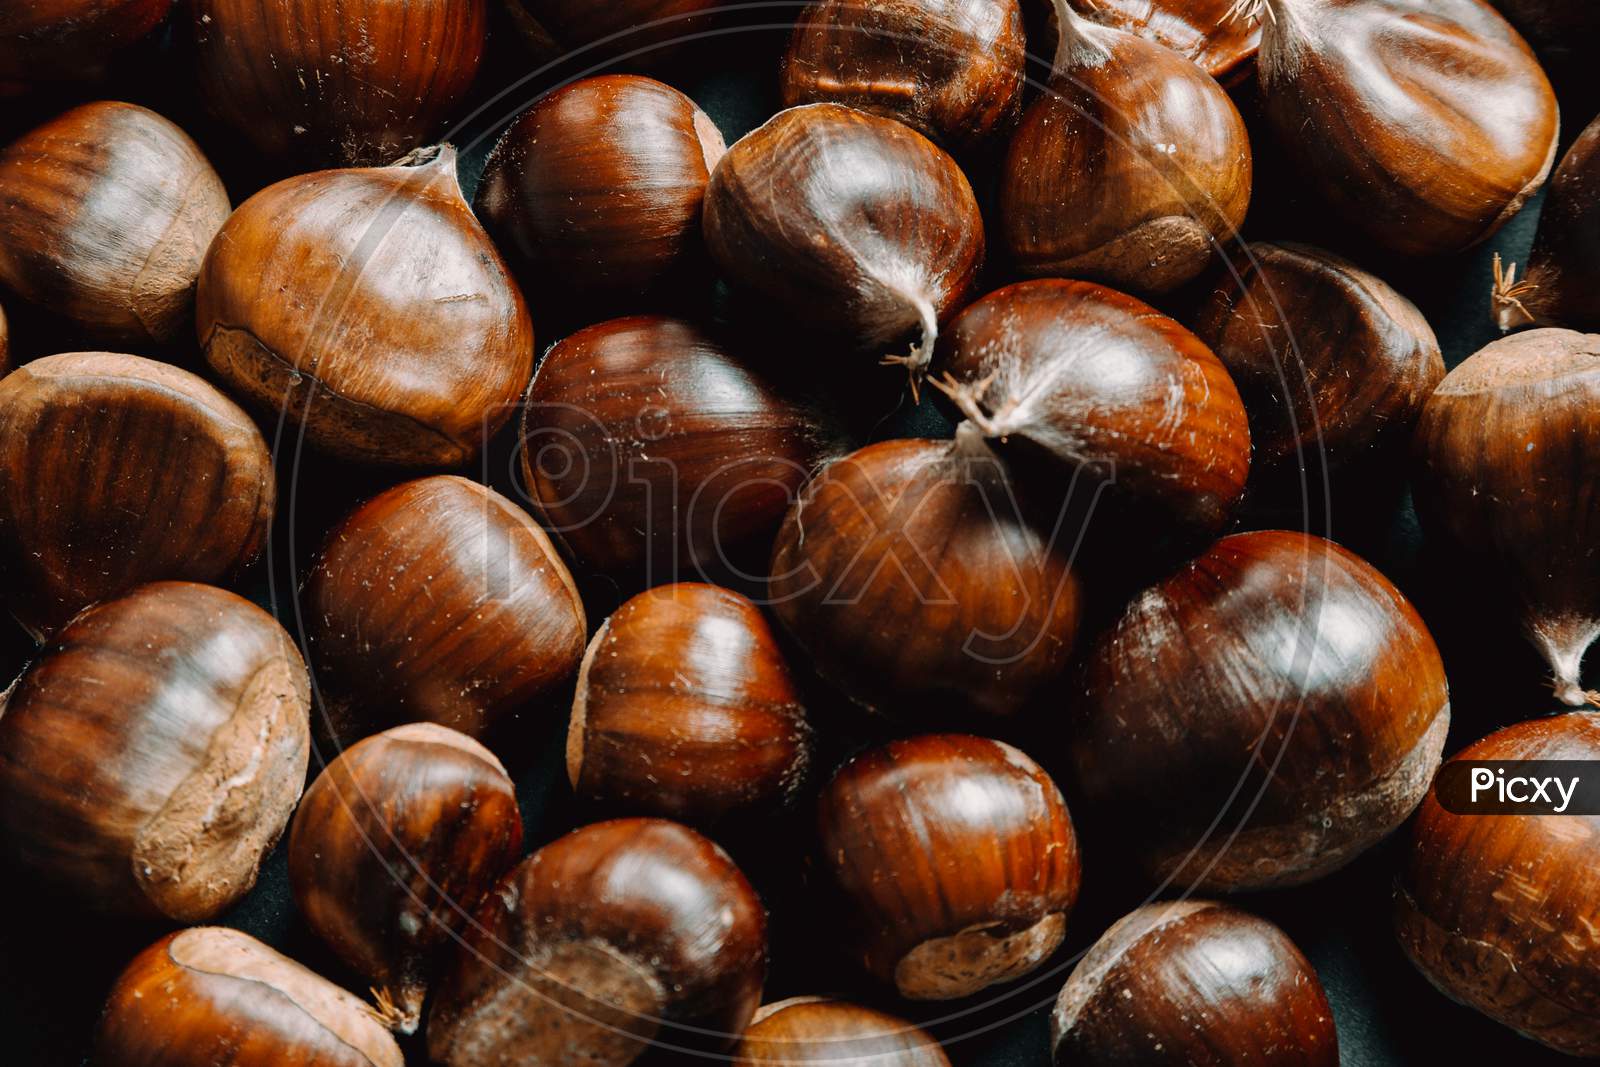 Super Close Up Of A Lot Of Chestnuts With Super Texture And Sharpness With Copy Space